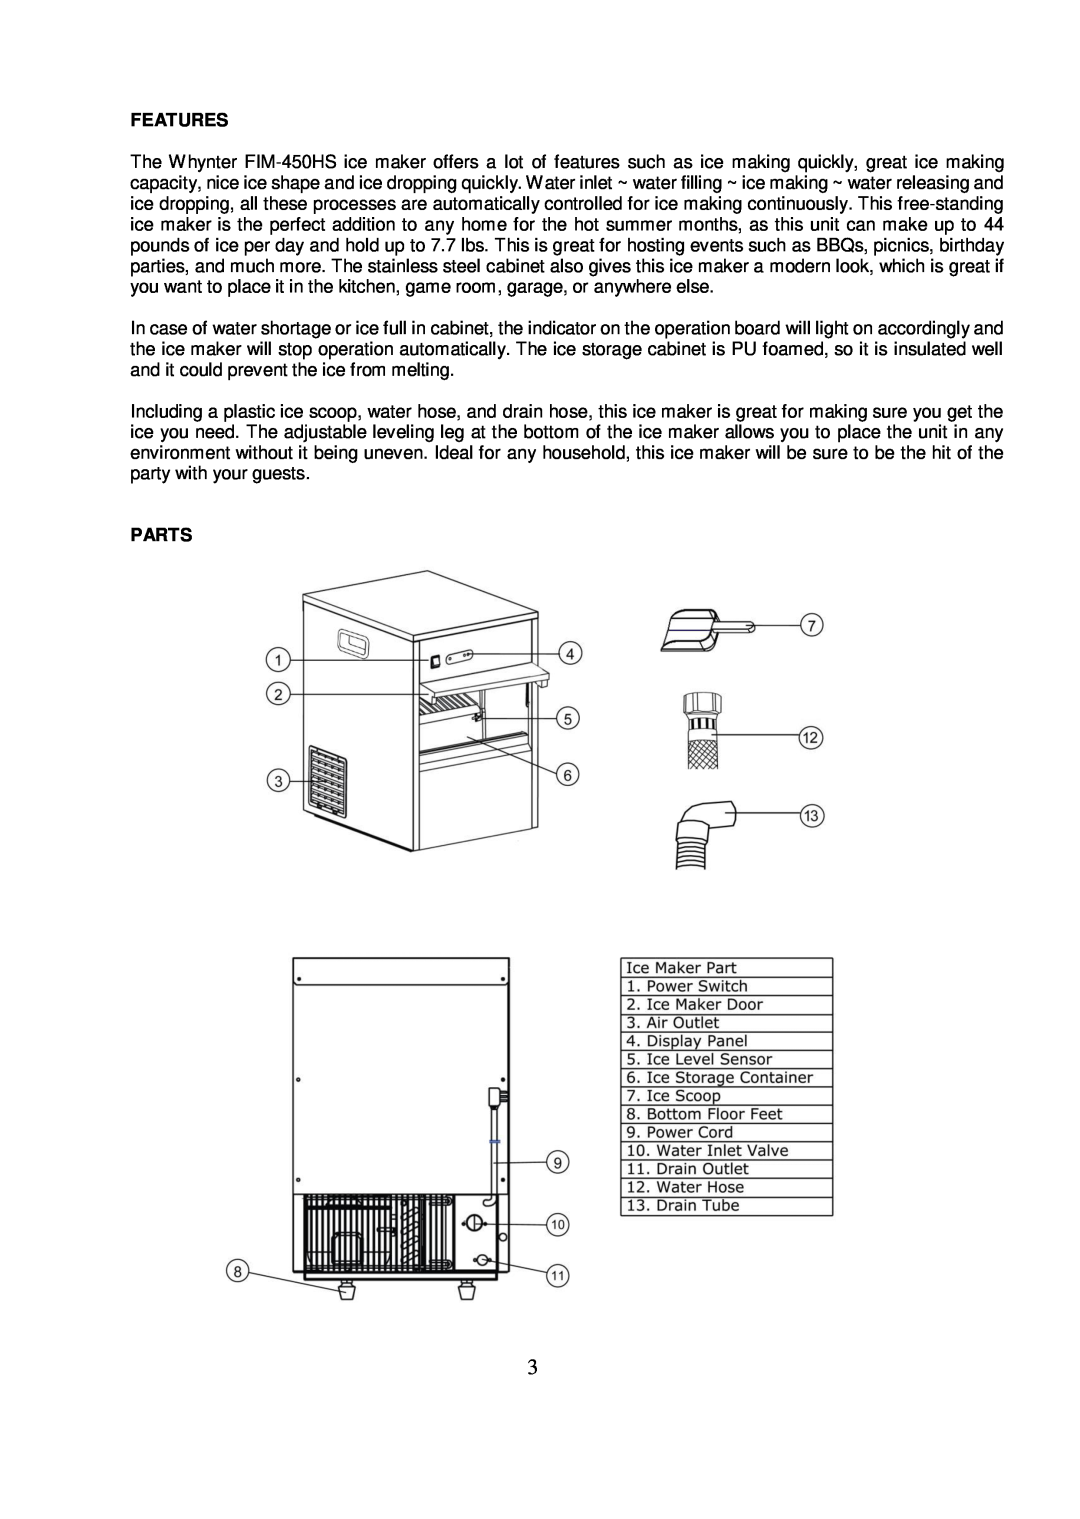 Whynter FIM-450HS instruction manual Features, Parts 